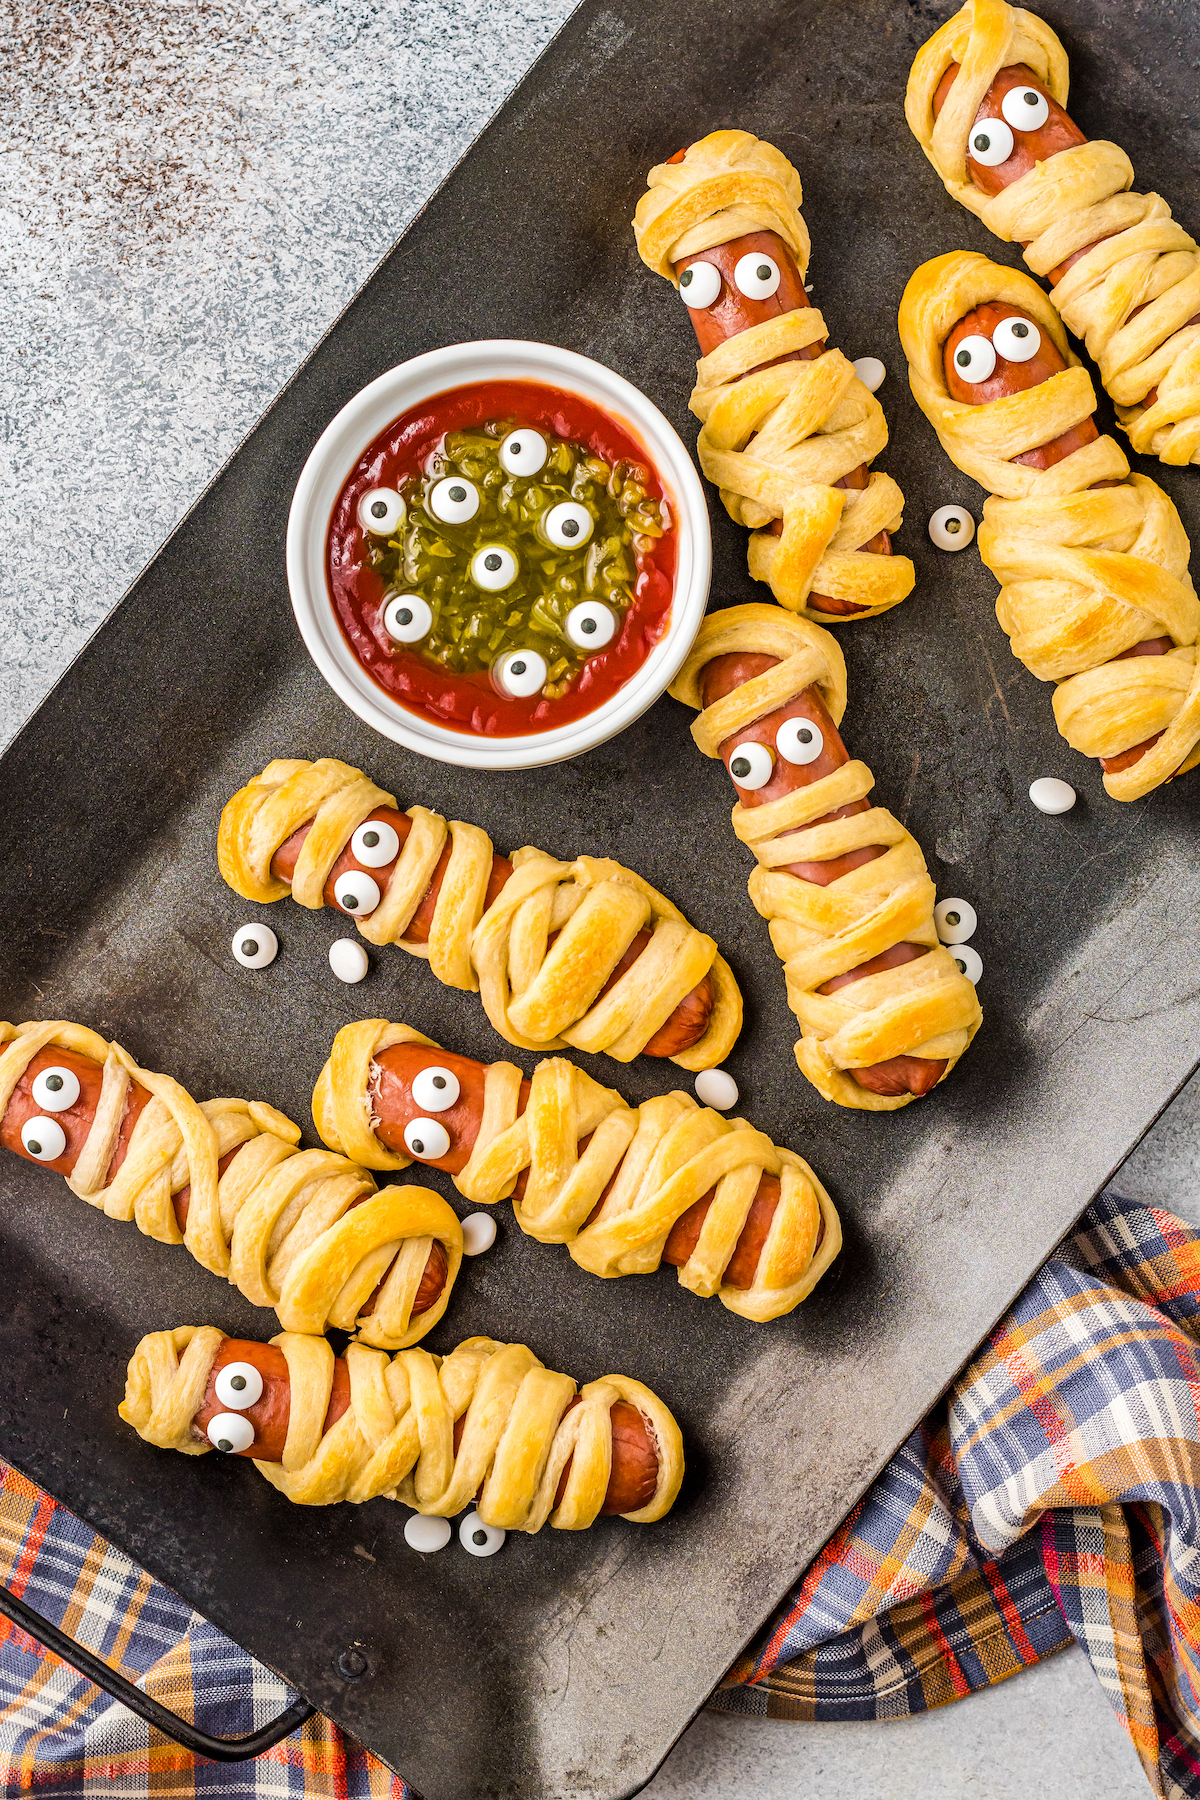 Mummy hot dogs with a bowl of ketchup and relish.